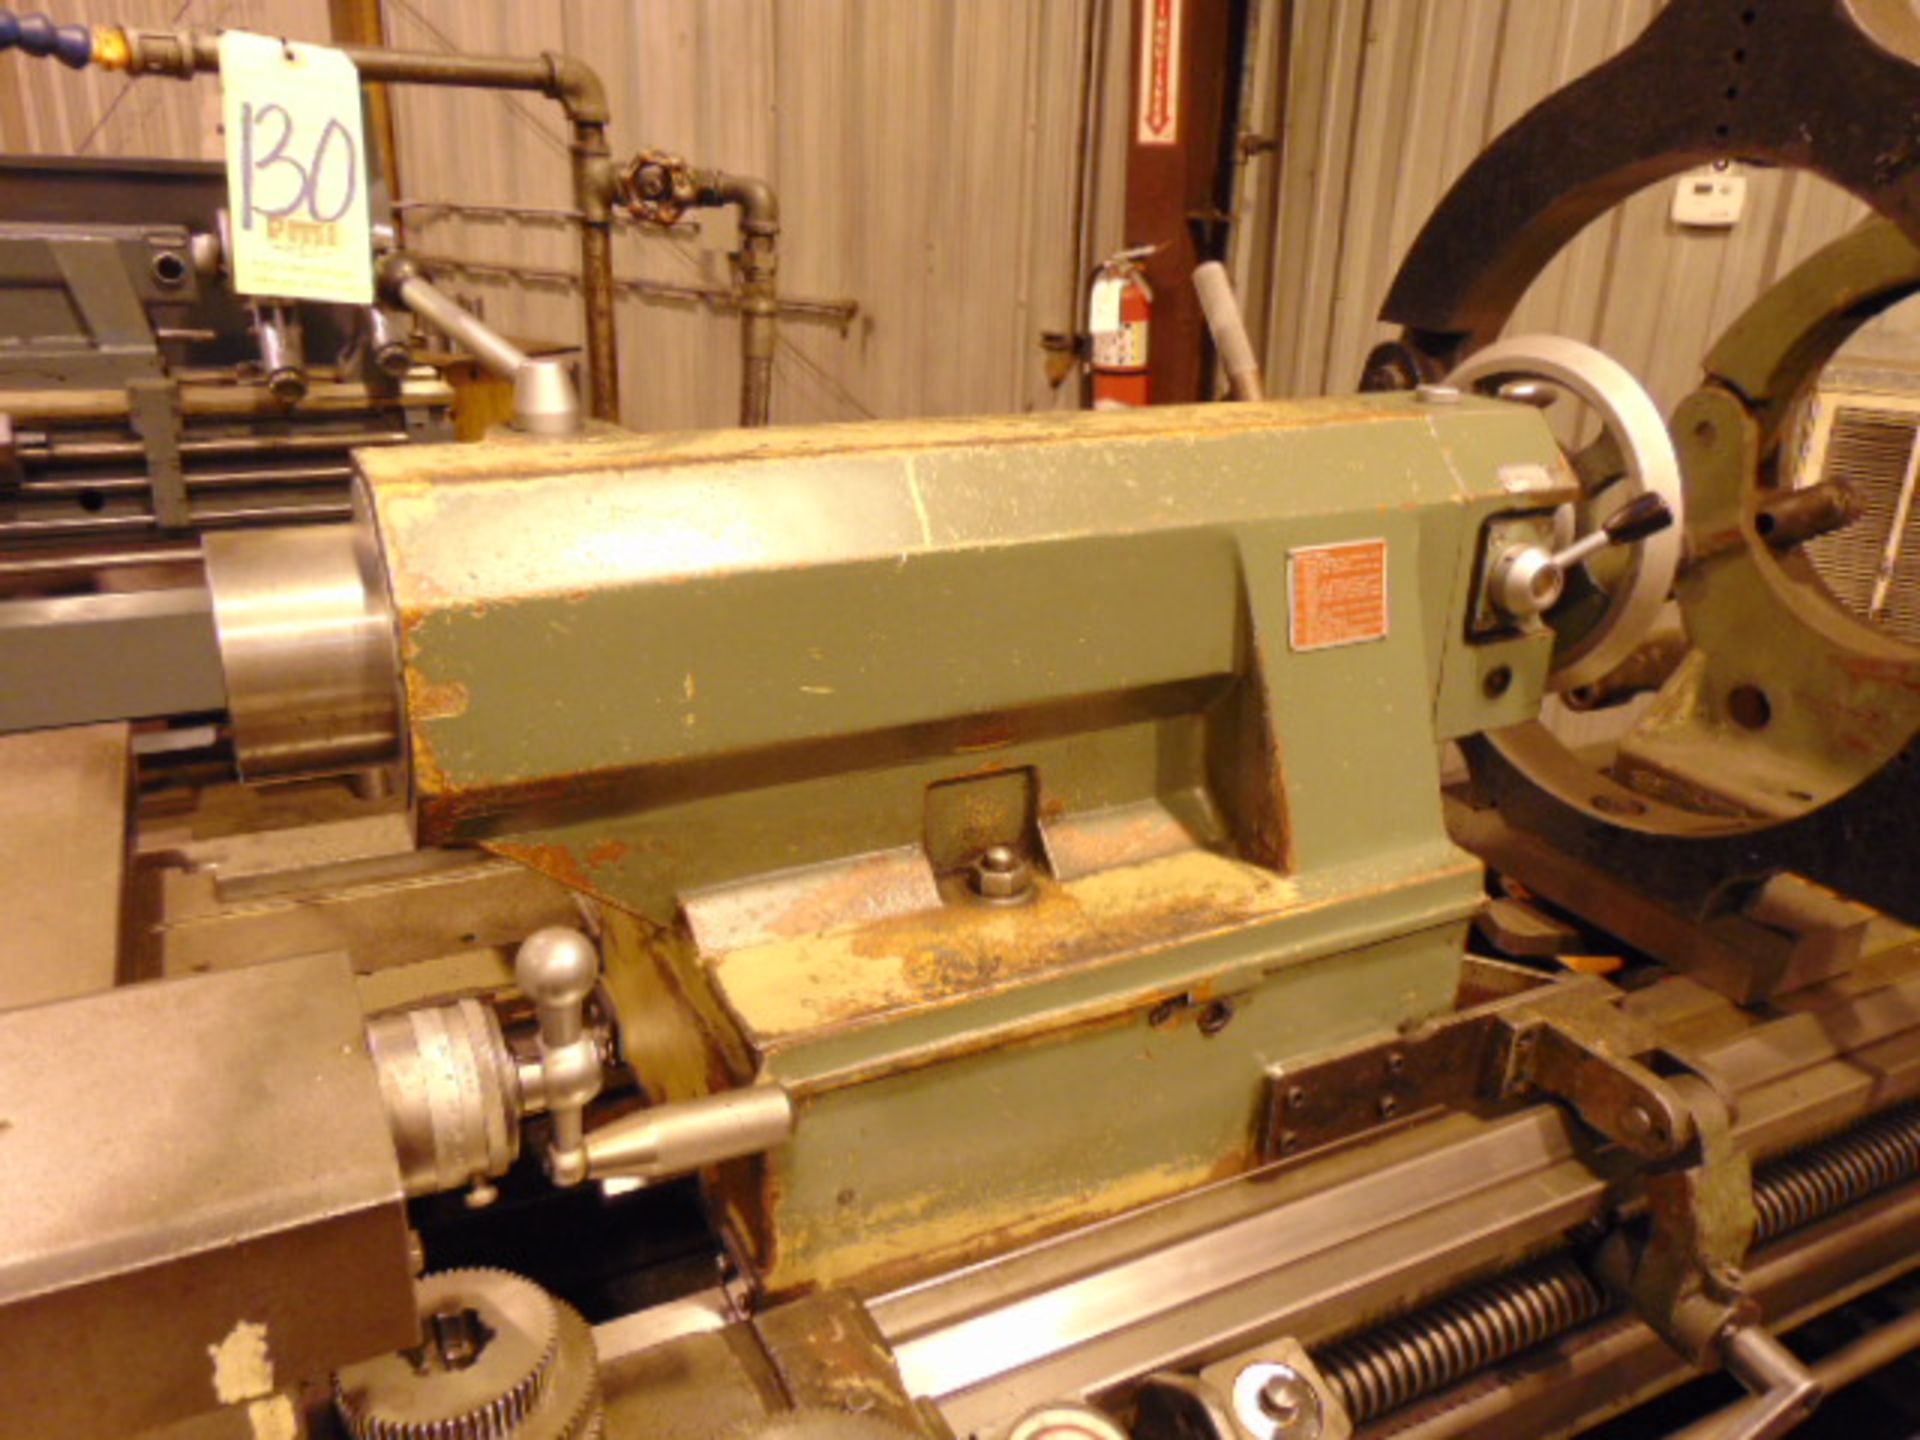 GAP BED ENGINE LATHE, KINGSTON 30” X 80” MDL. HR2000 HEAVY DUTY, new 1996, 24-3/4” dia. 4-jaw chuck, - Image 8 of 17